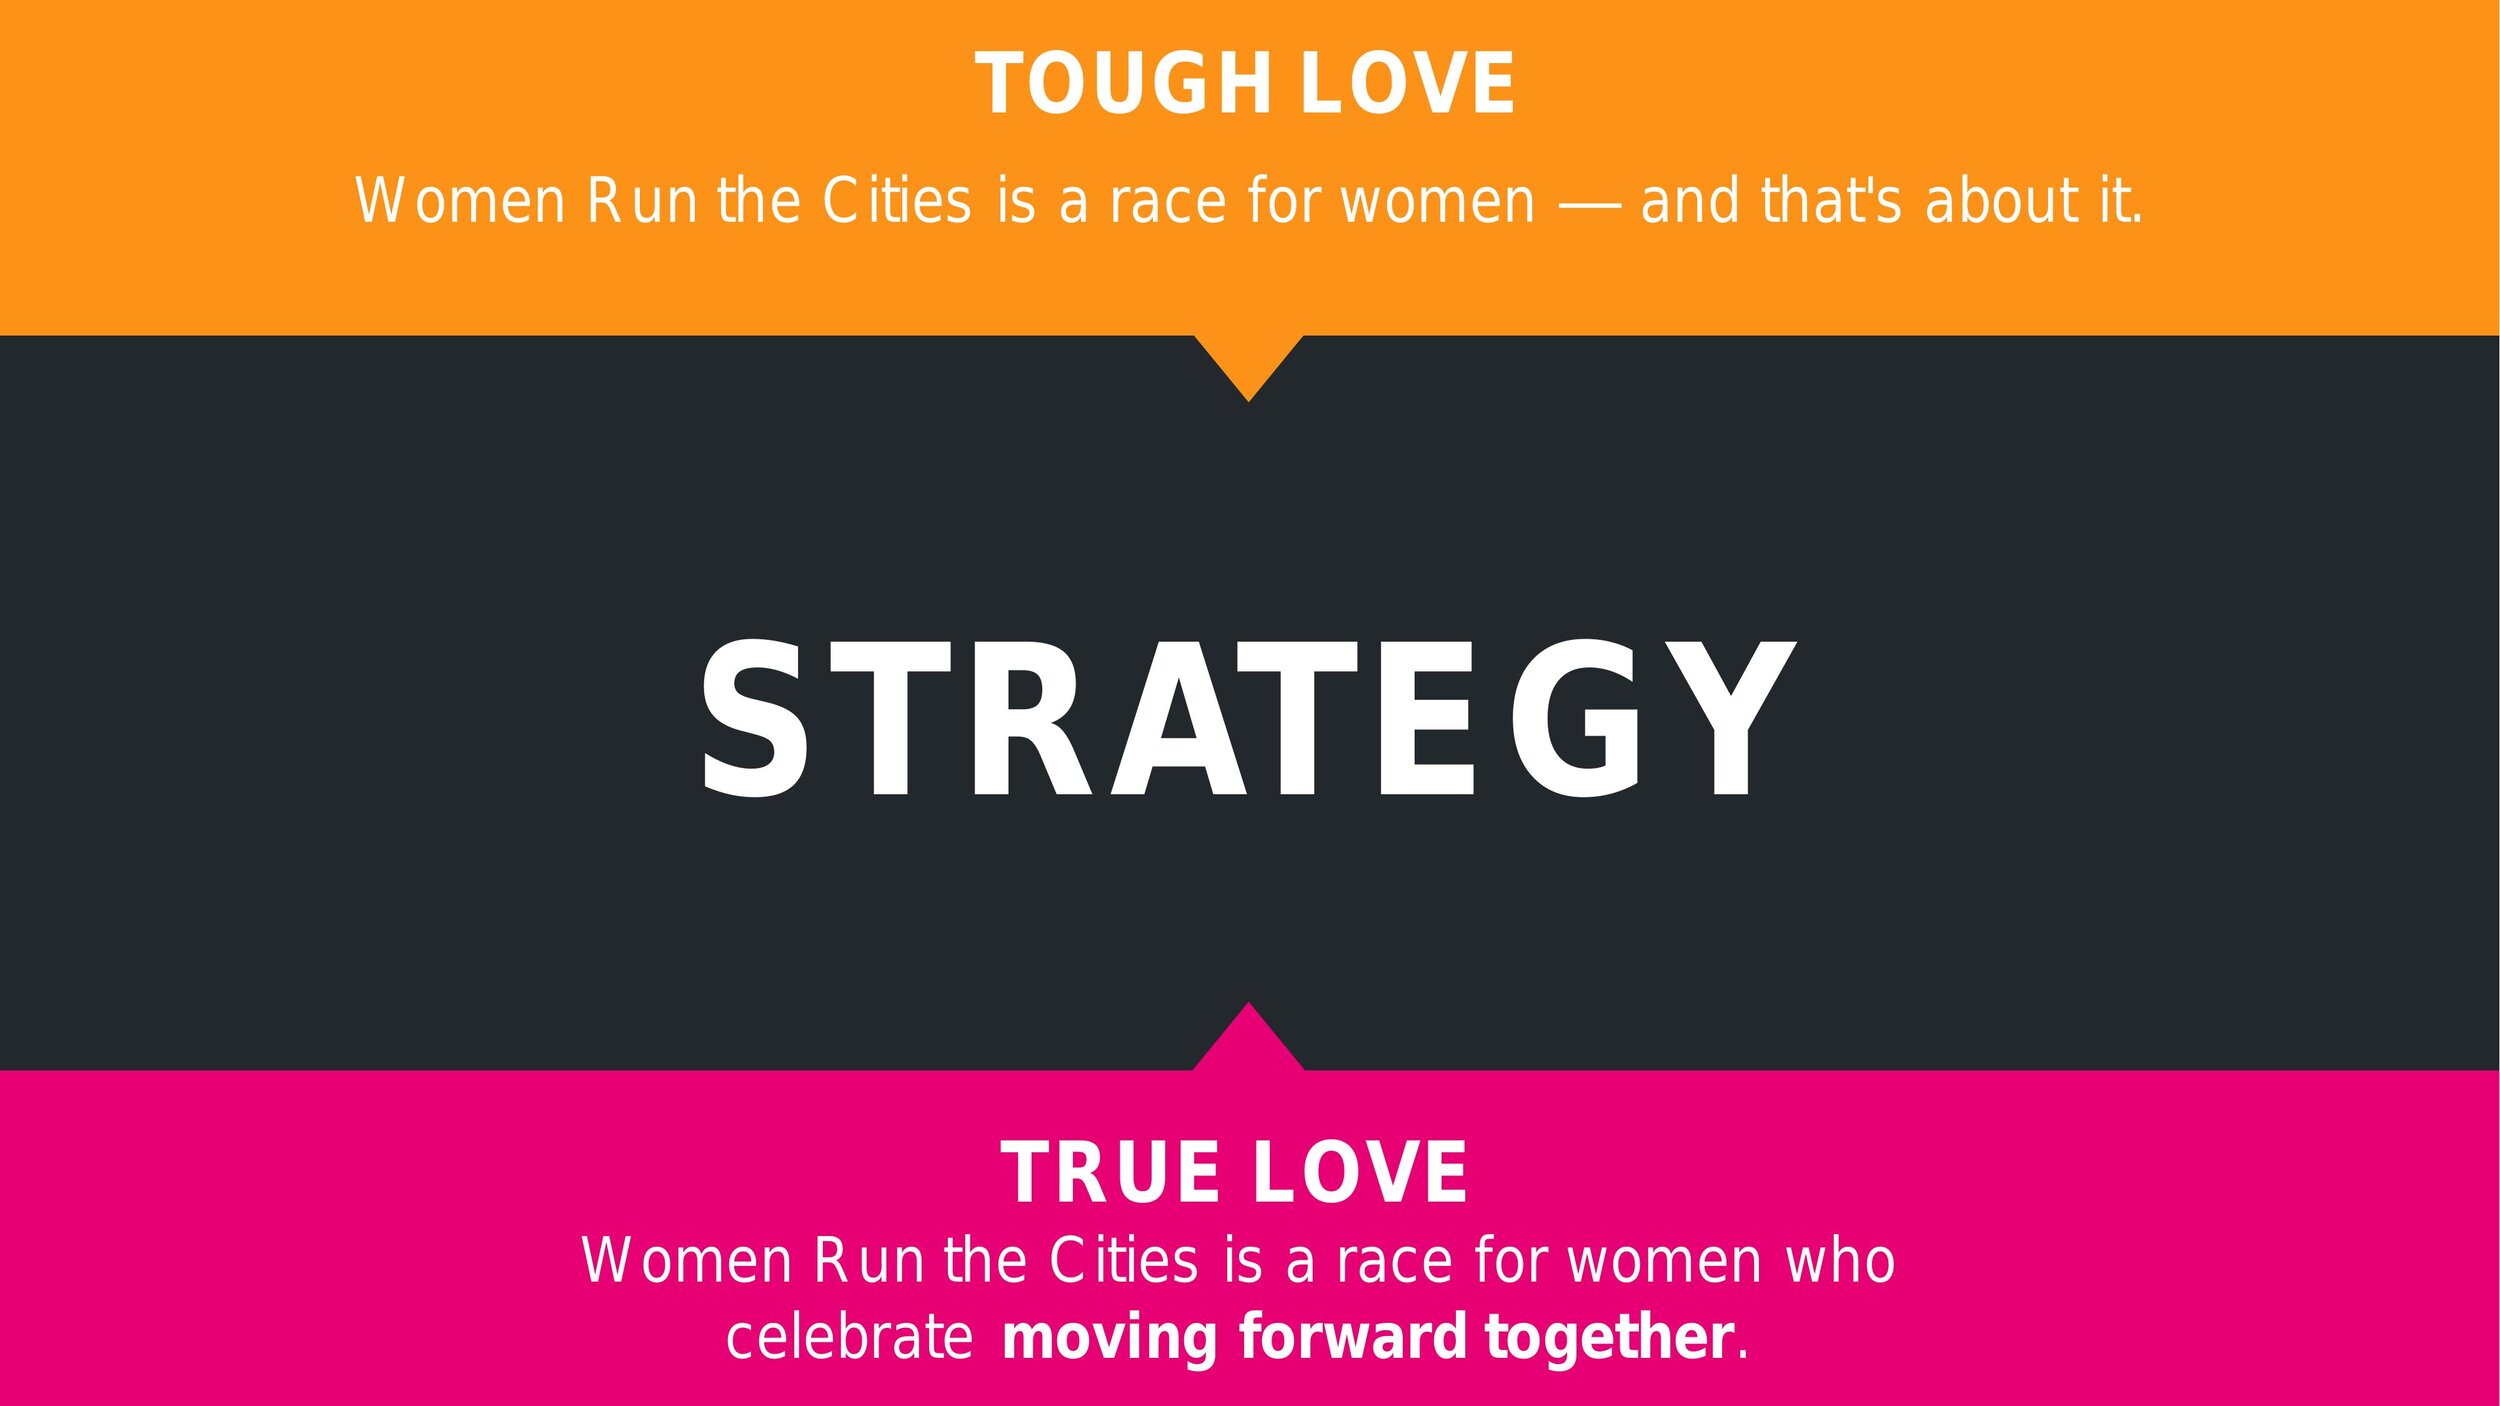  “True Love” was Periscope’s term for strategy statement at the time. 